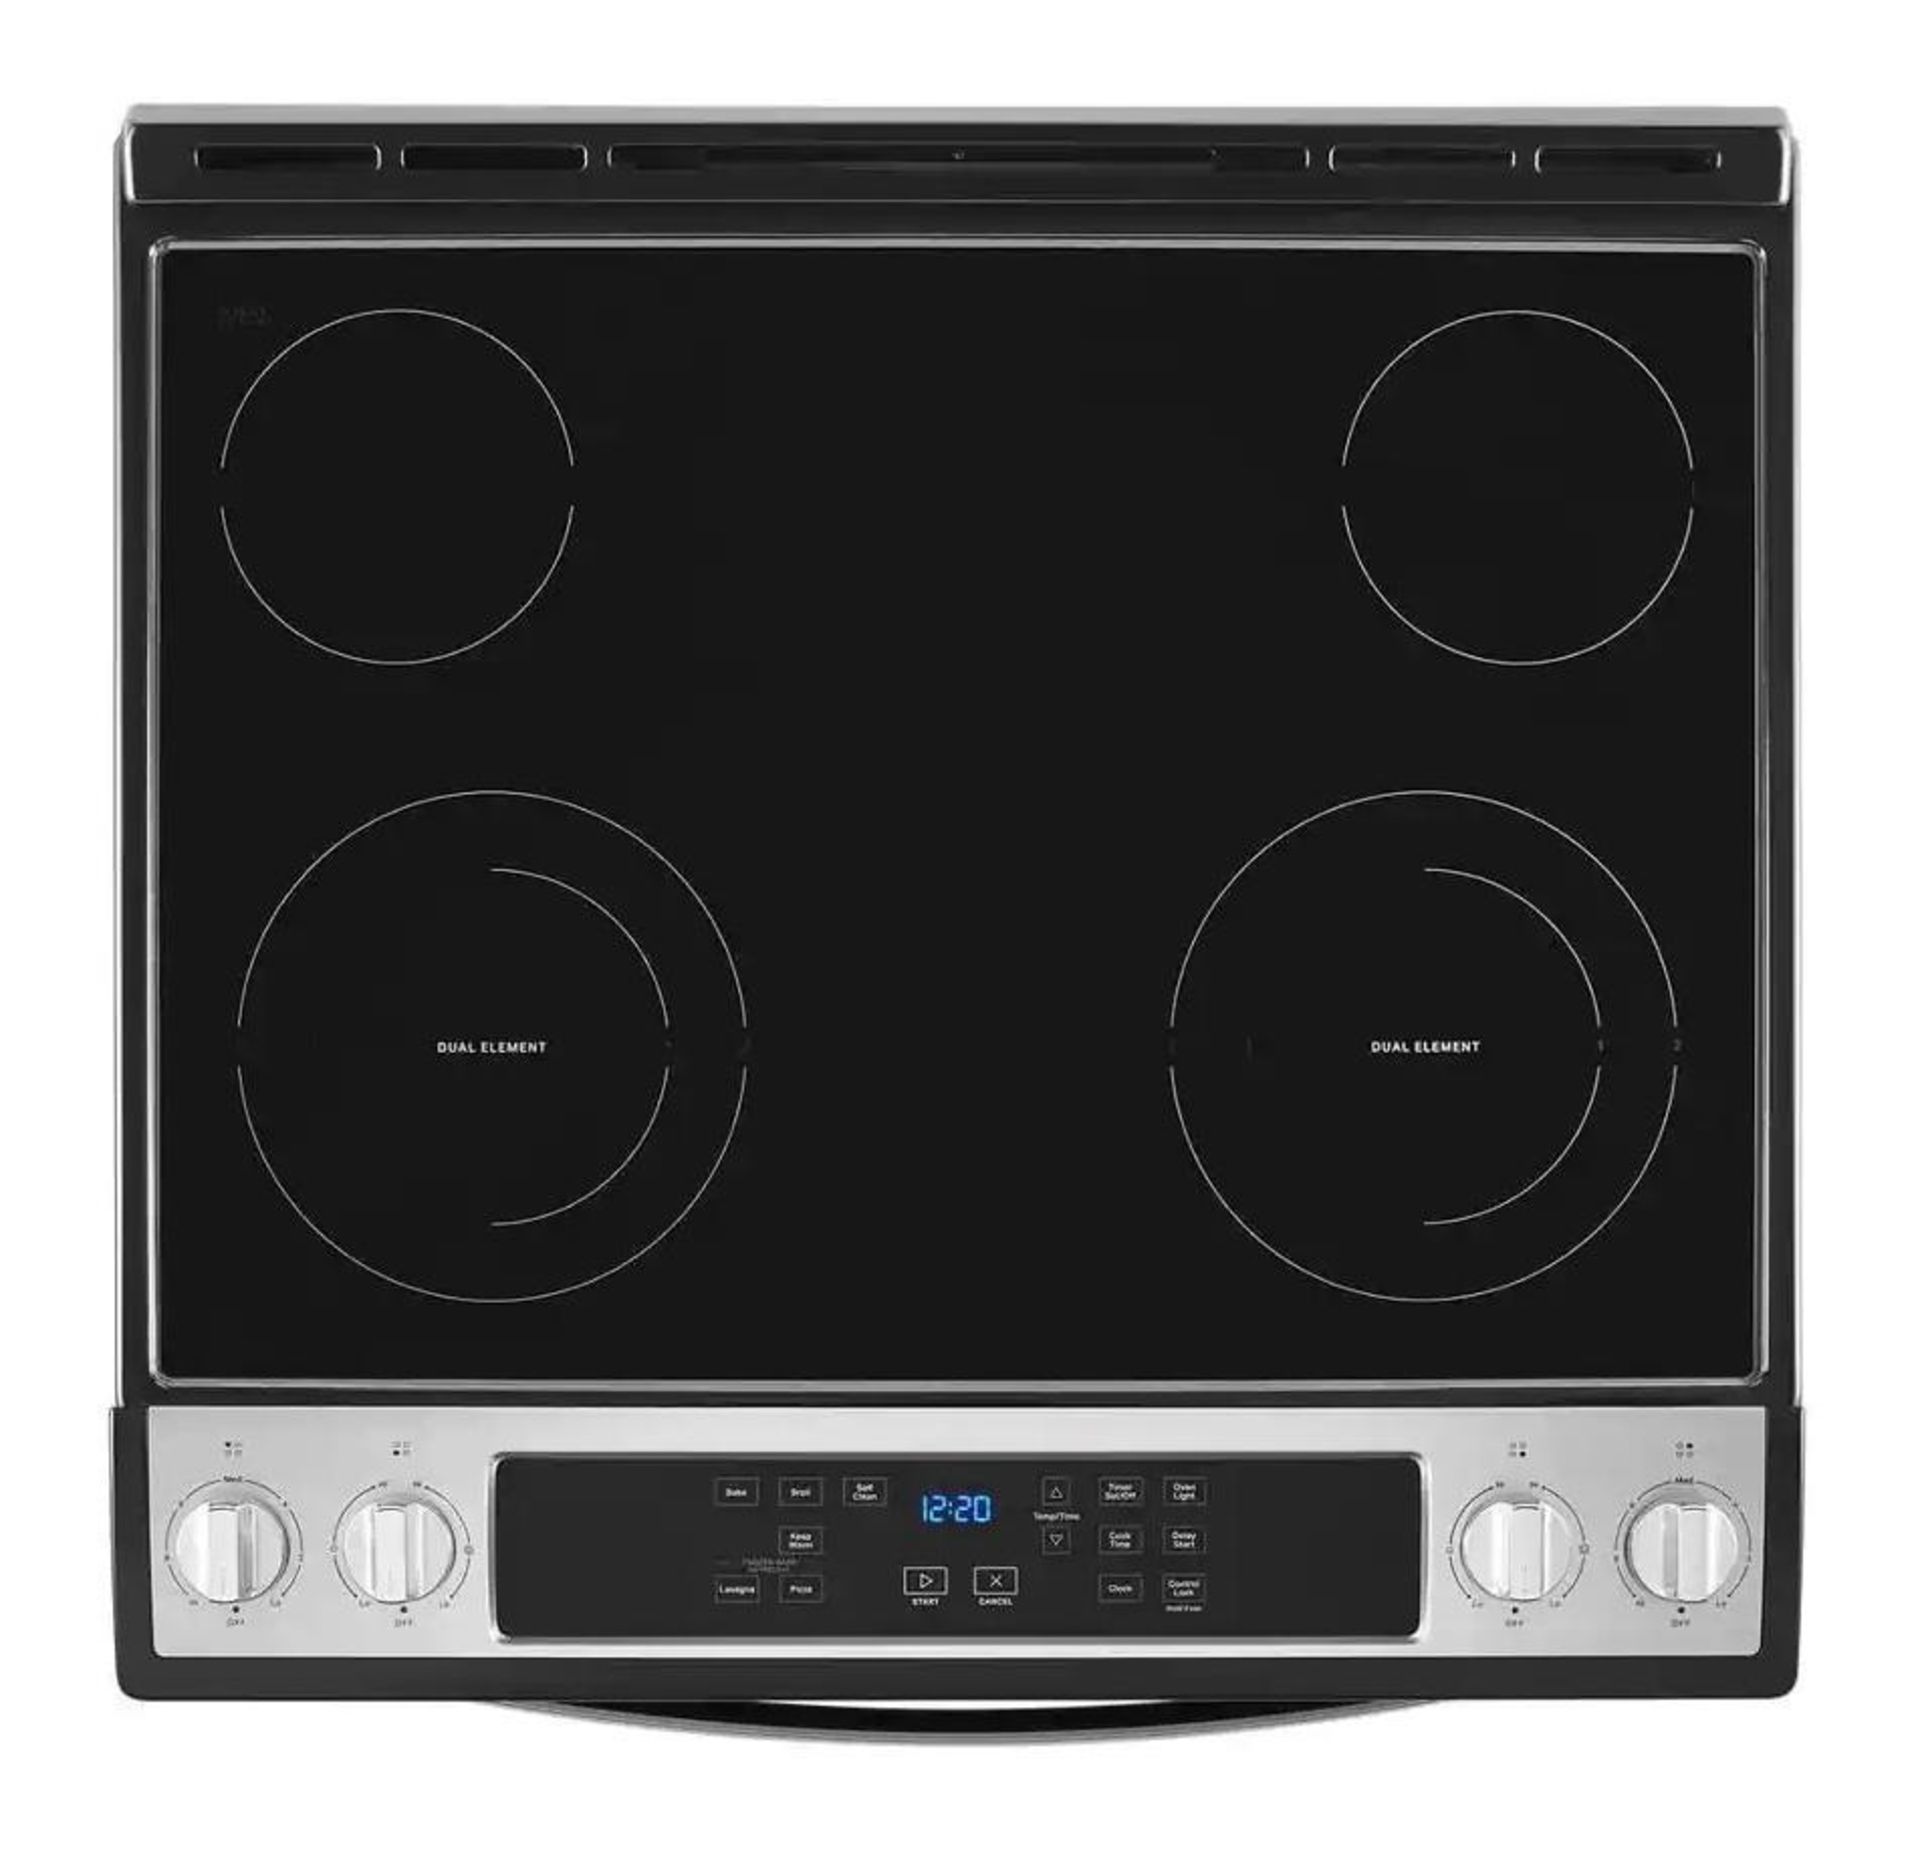 Whirlpool Model: wee515sols2  30" 4.8 Cu. ft Electric Range in Stainless Steel.  (Oven is new has ne - Image 3 of 9